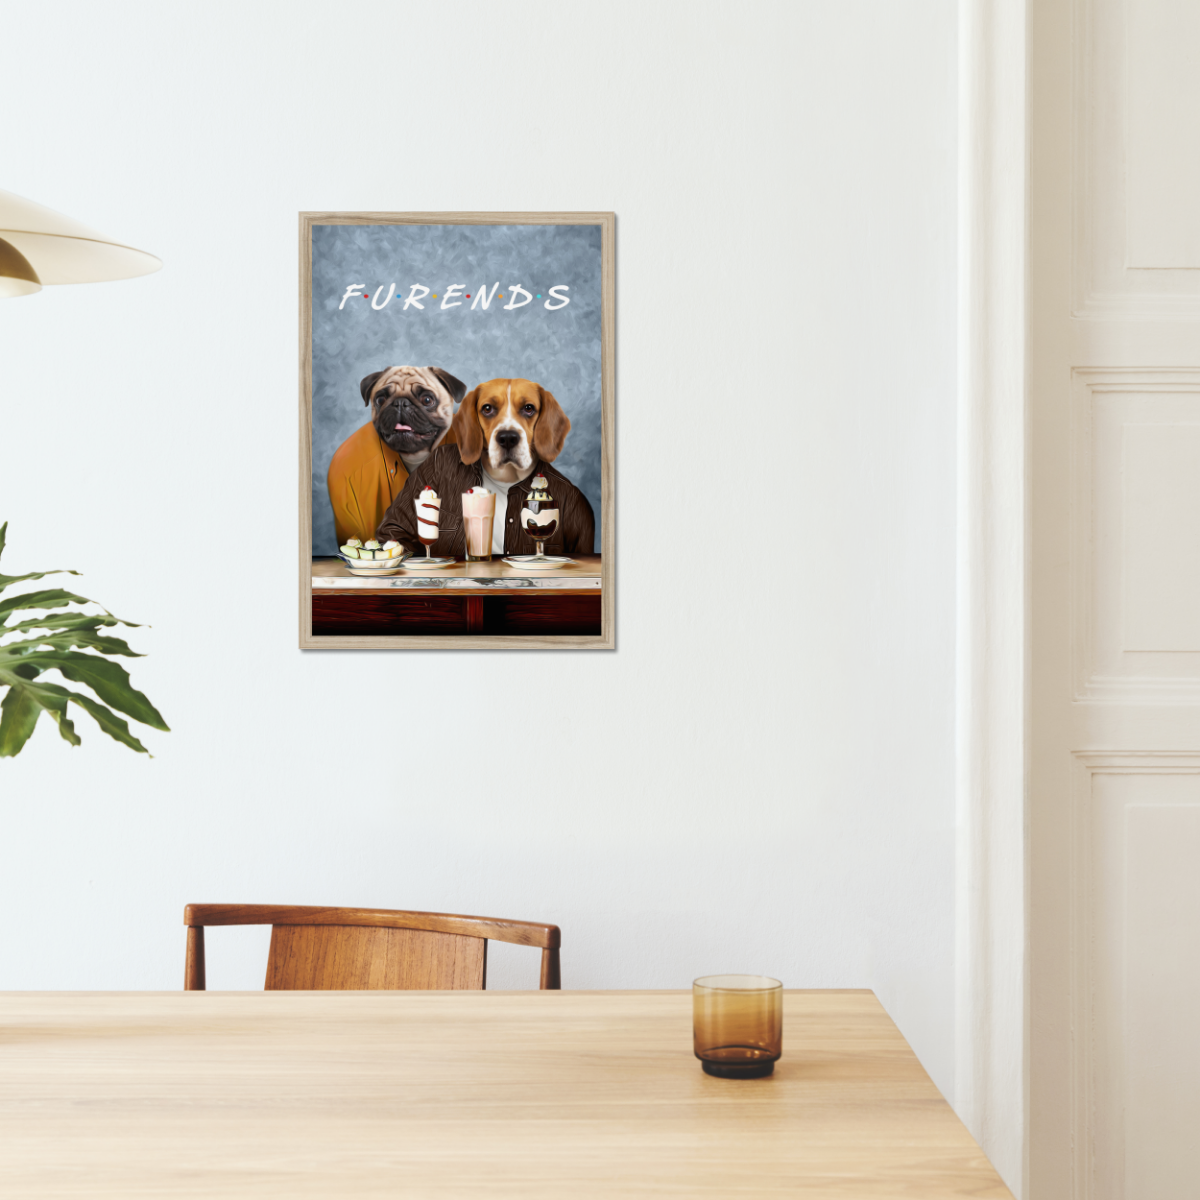 Two Furends: Custom Pet Portrait - Paw & Glory - #pet portraits# - #dog portraits# - #pet portraits uk#Paw & Glory, paw and glory, paintings of pets from photos, dog portrait painting, my pet painting, pet portrait singapore, pet portrait admiral, nasa dog portrait, pet portrait